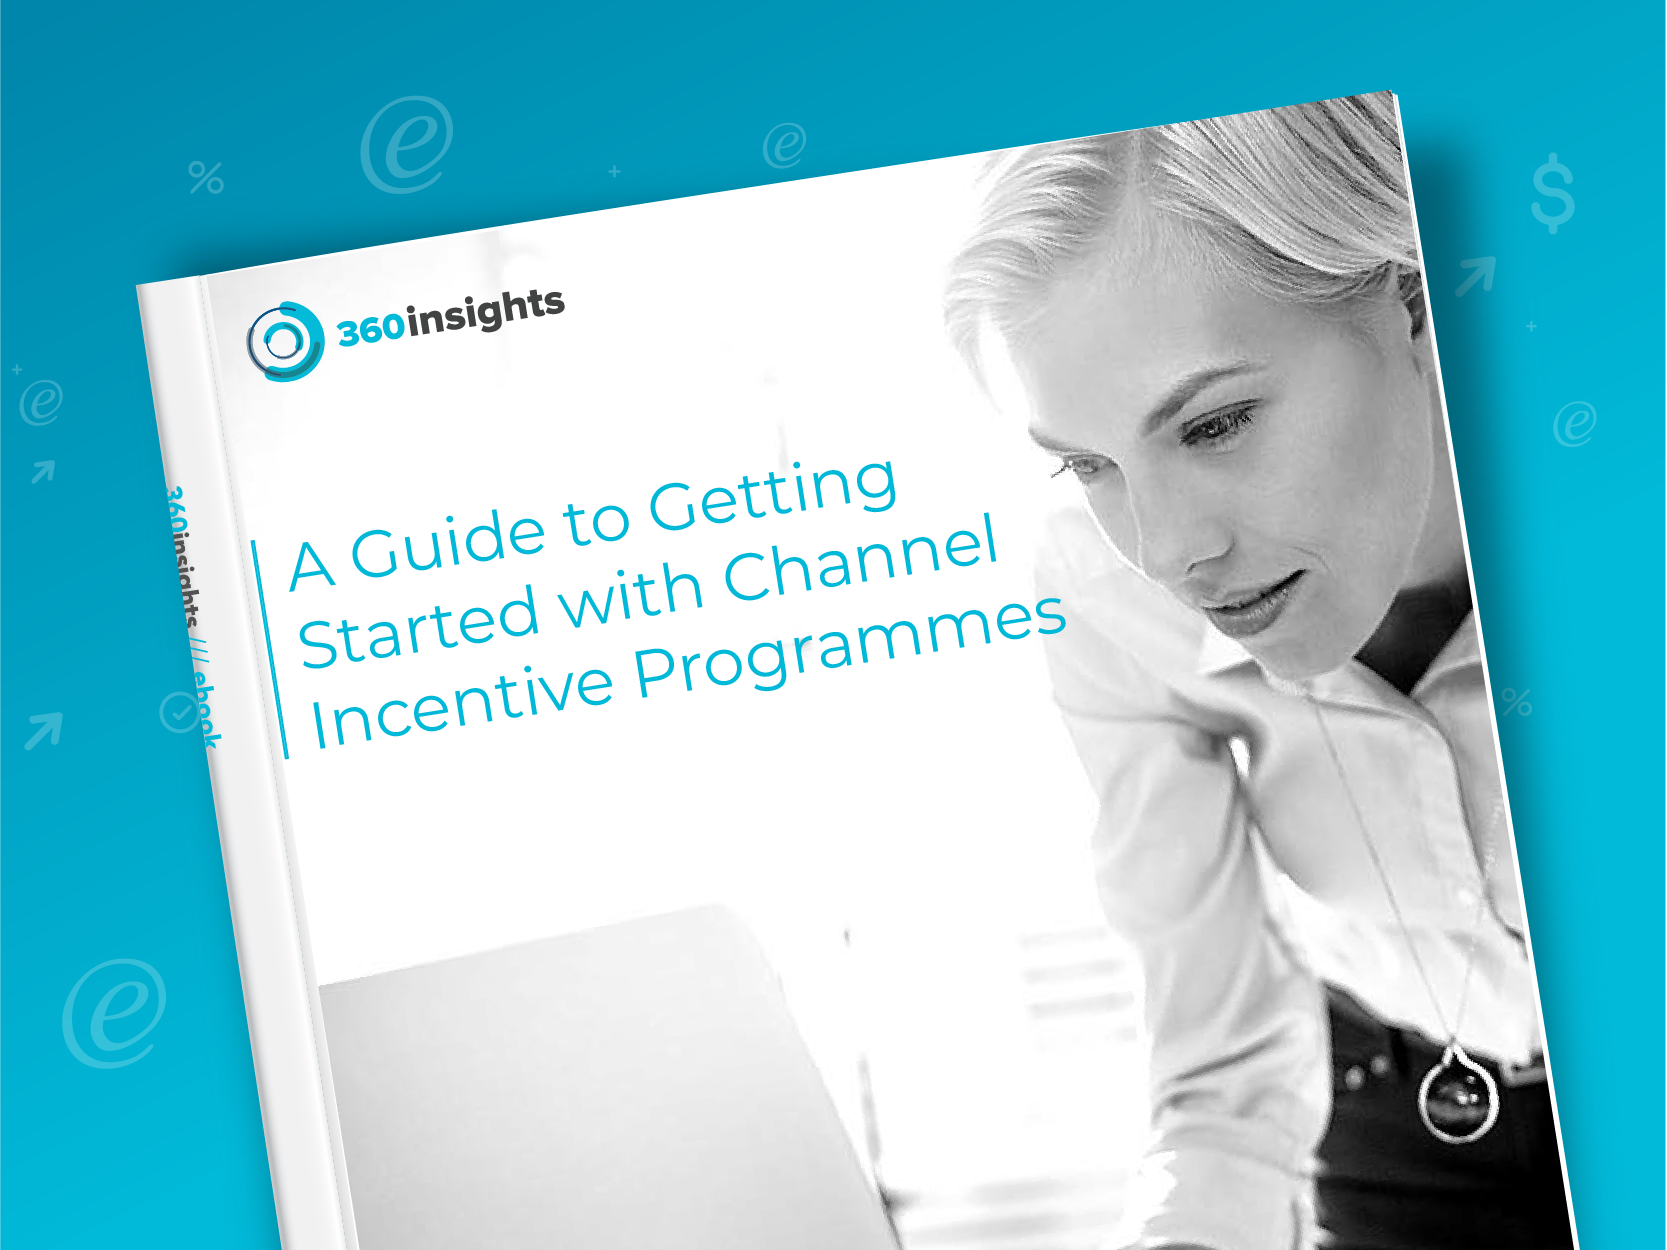 eBook about getting started with channel incentive programmes